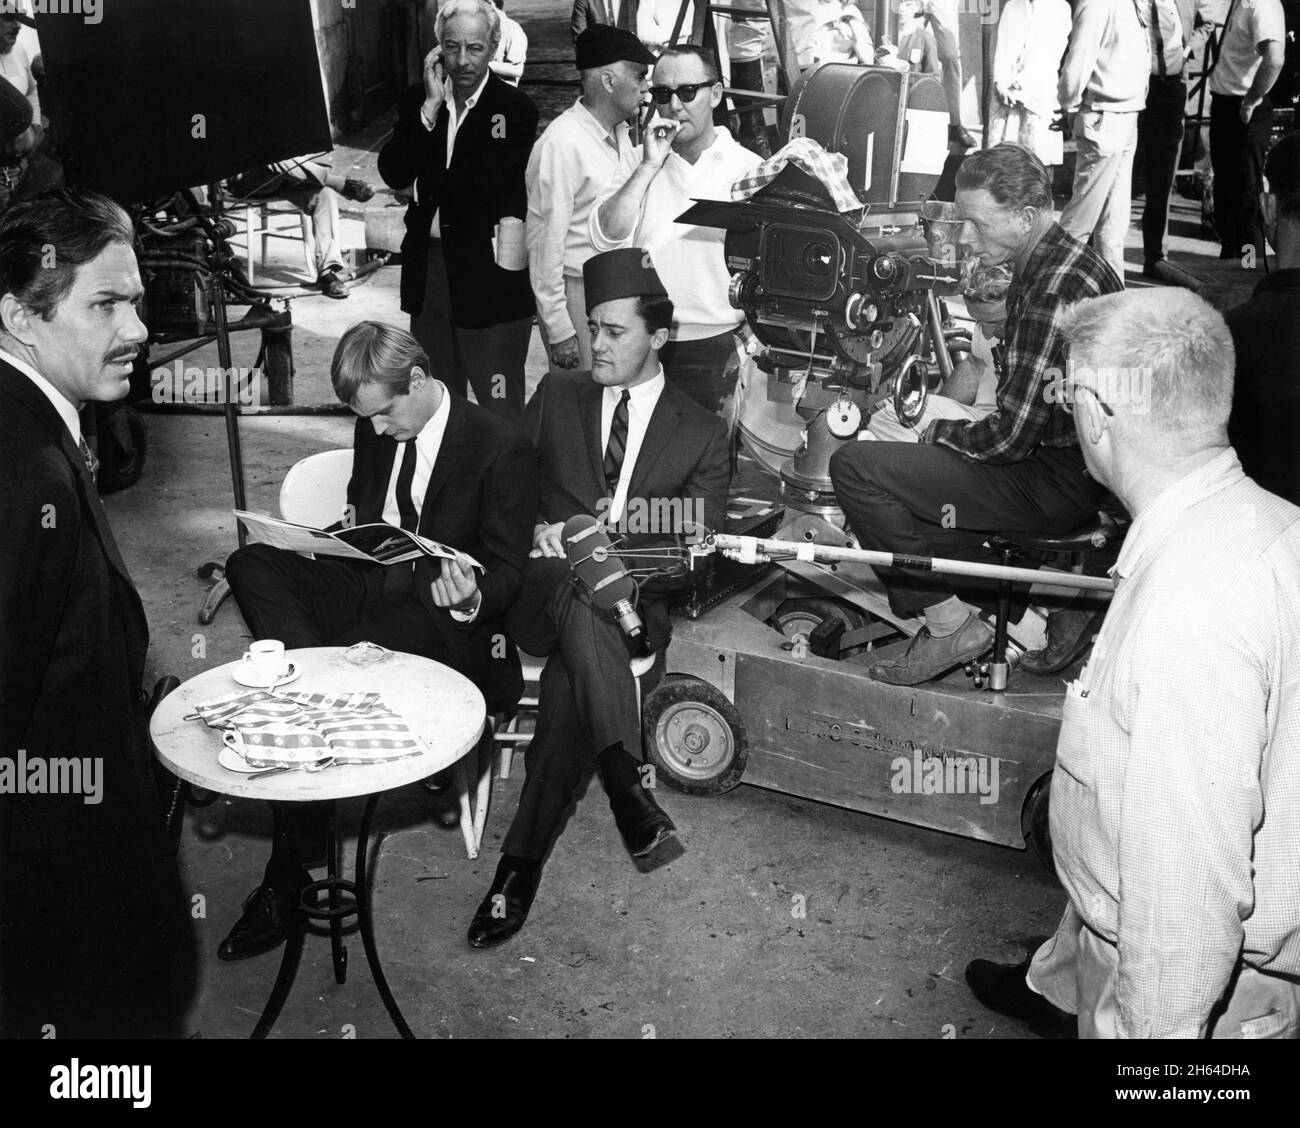 MICHAEL STRONG DAVID McCALLUM as Illya Kuryakin and ROBERT VAUGHN as Napoleon Solo on set candid with Camera / Movie Crew during filming of THE DEADLY GODDESS AFFAIR 1966 (Season  2 Episode 17) director SEYMOUR ROBBIE of THE MAN FROM U.N.C.L.E. US TV Series 1964 - 1968) creator Sam Rolfe Arena Productions / MGM Television Stock Photo